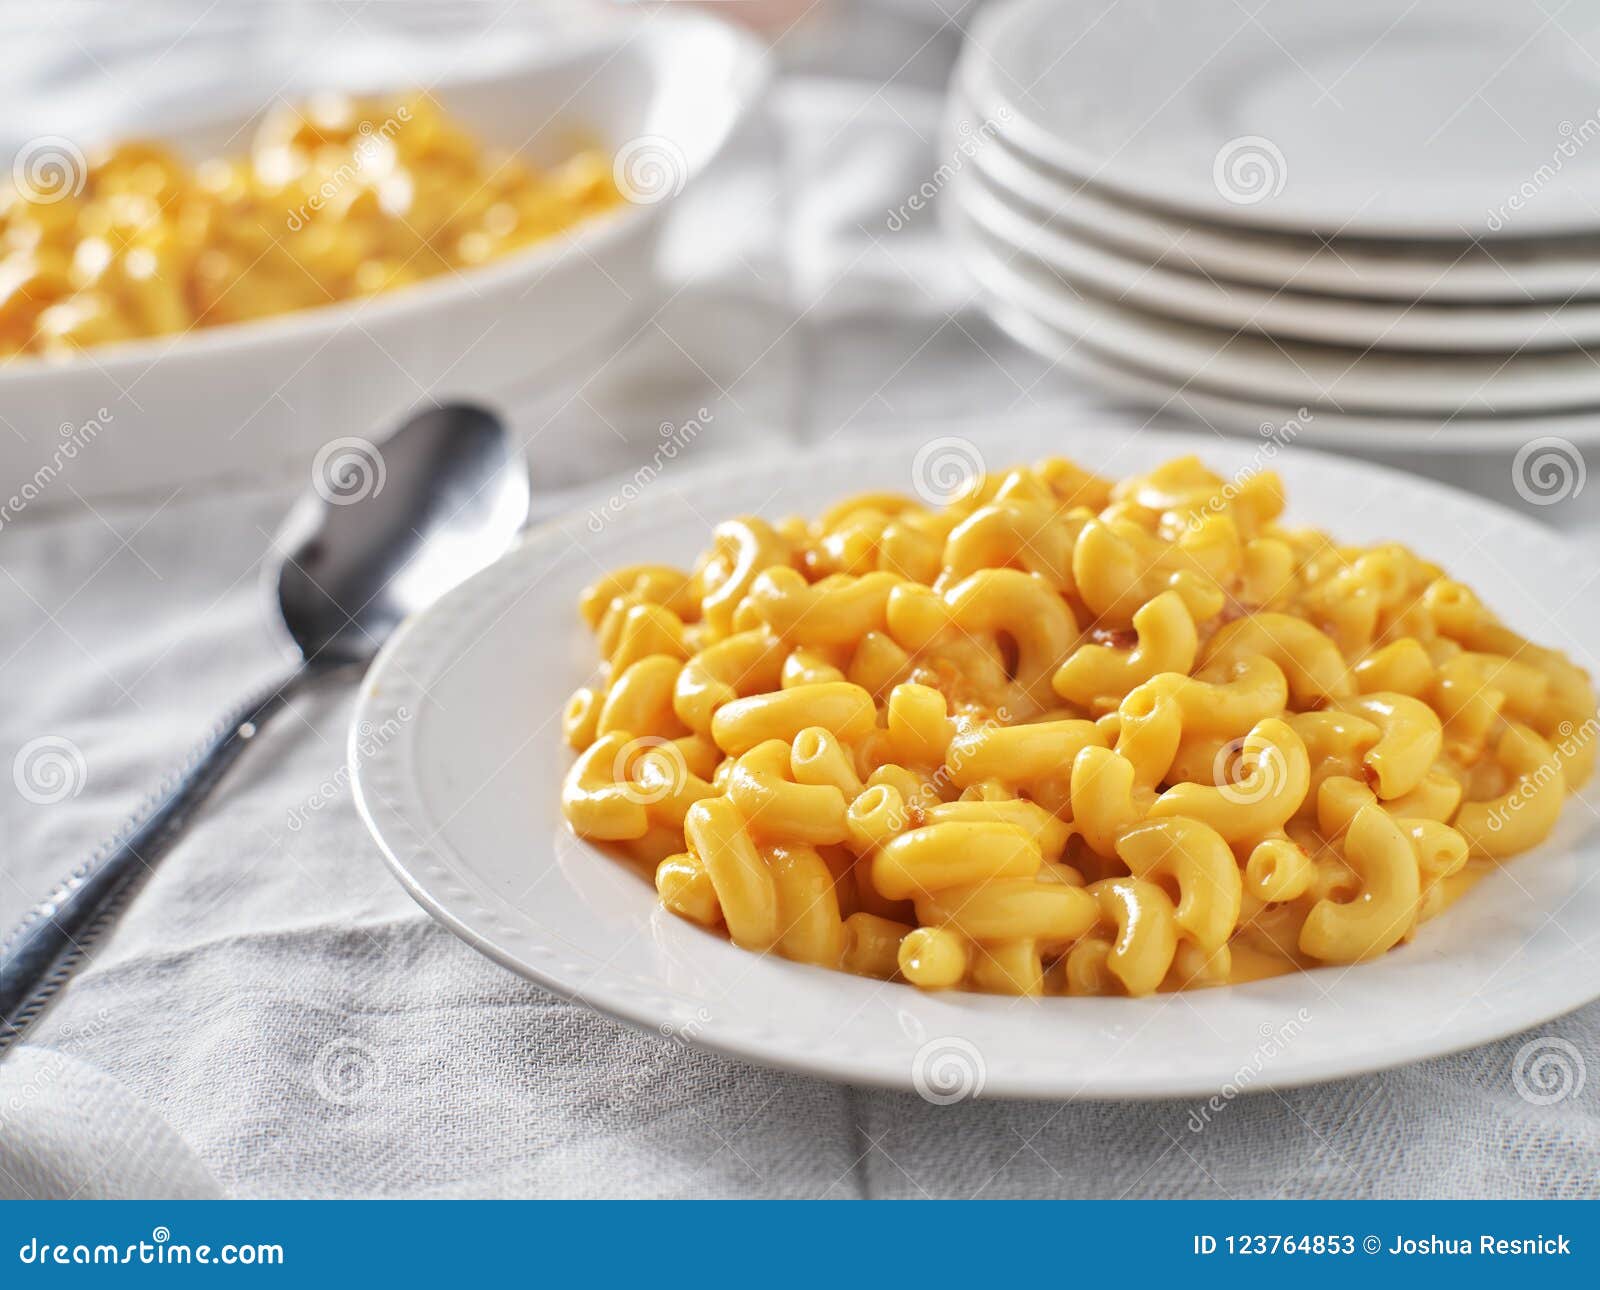 plate of creamy mac and cheese